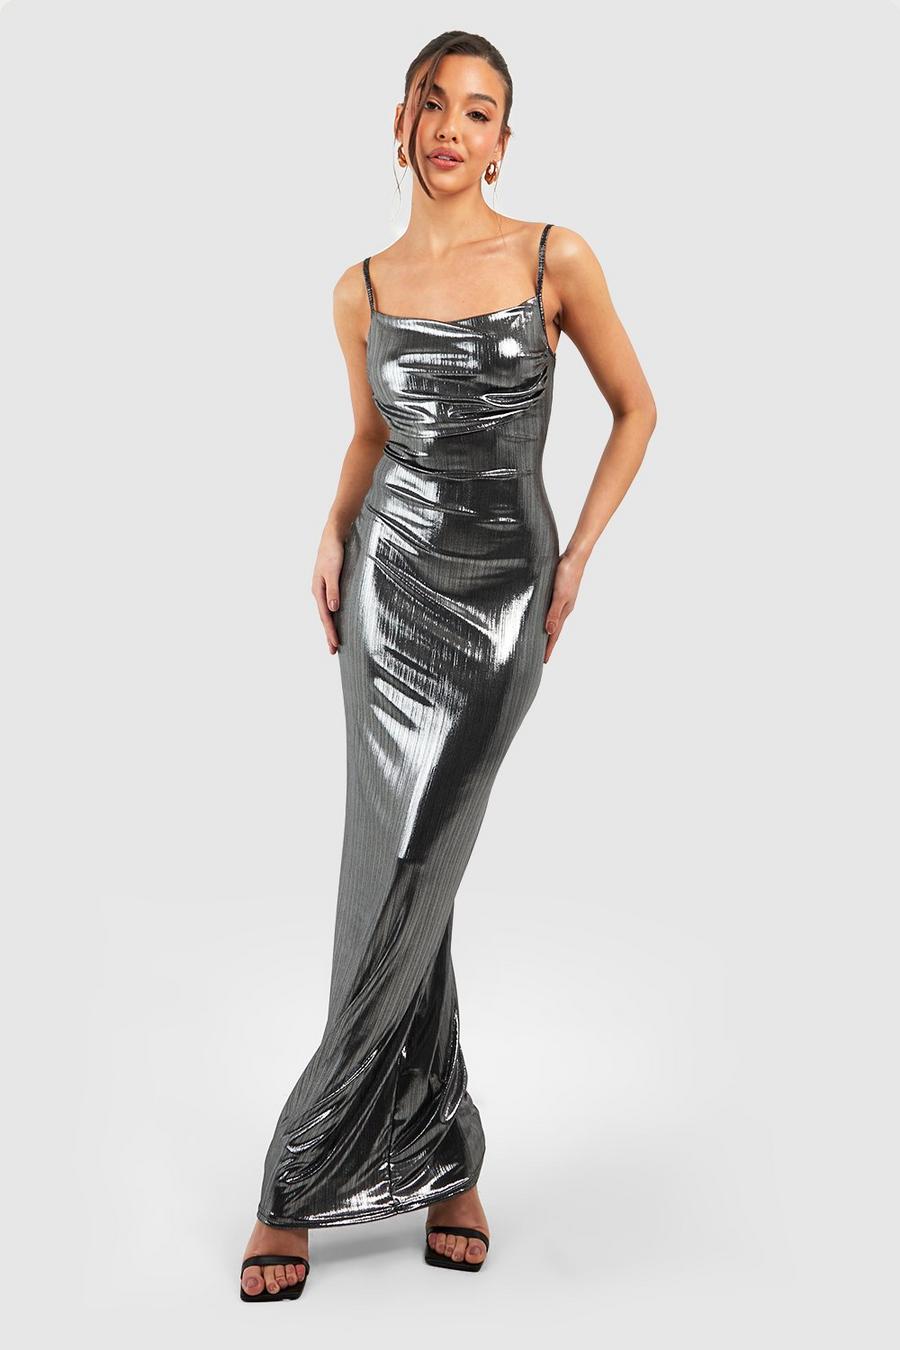 Shining Just For You Silver Metallic Cowl Neck Maxi Dress